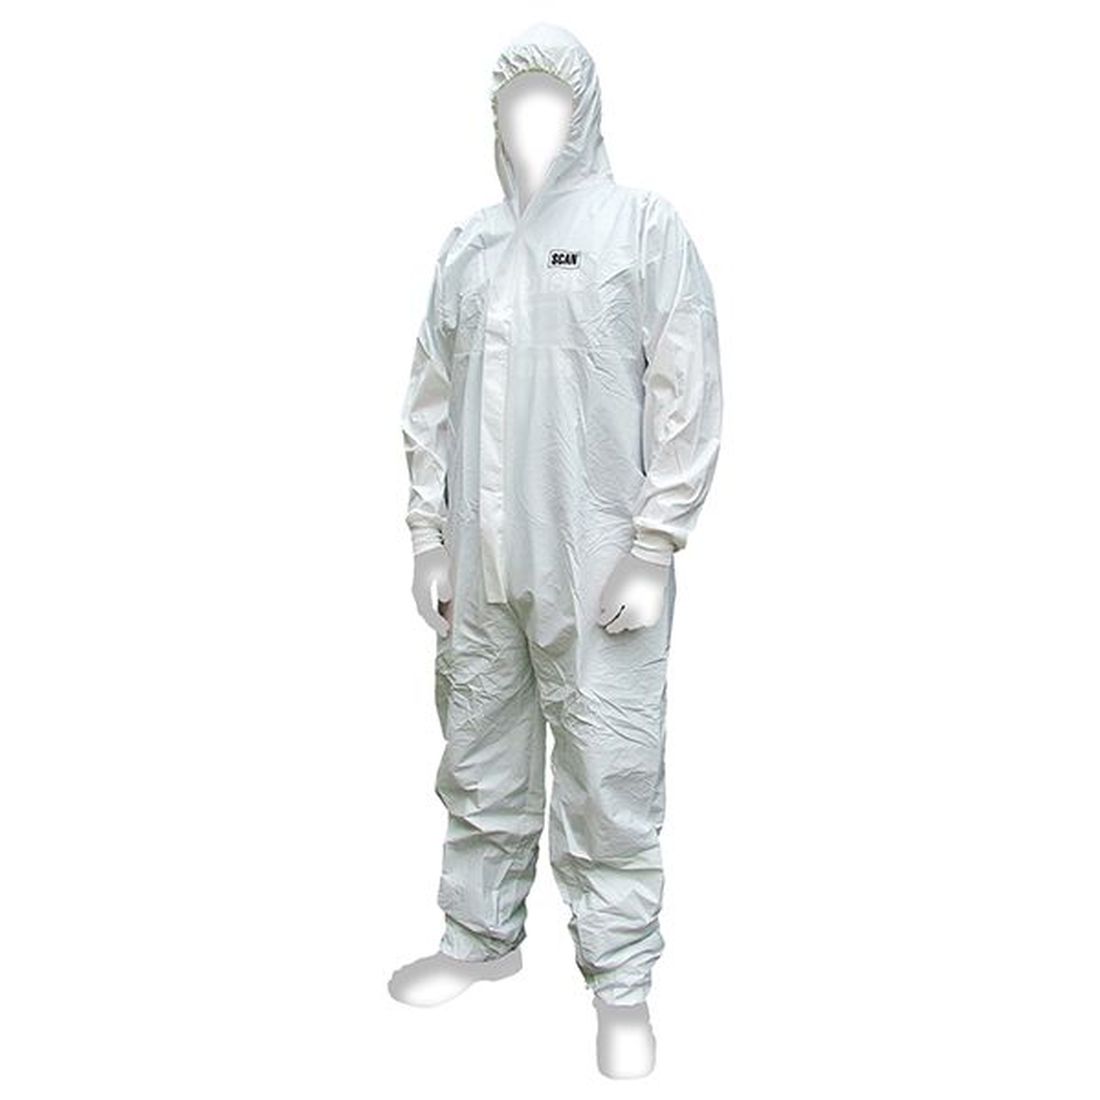 Scan Chemical Splash Resistant Disposable Coverall White Type 5/6 M (36-39in)        